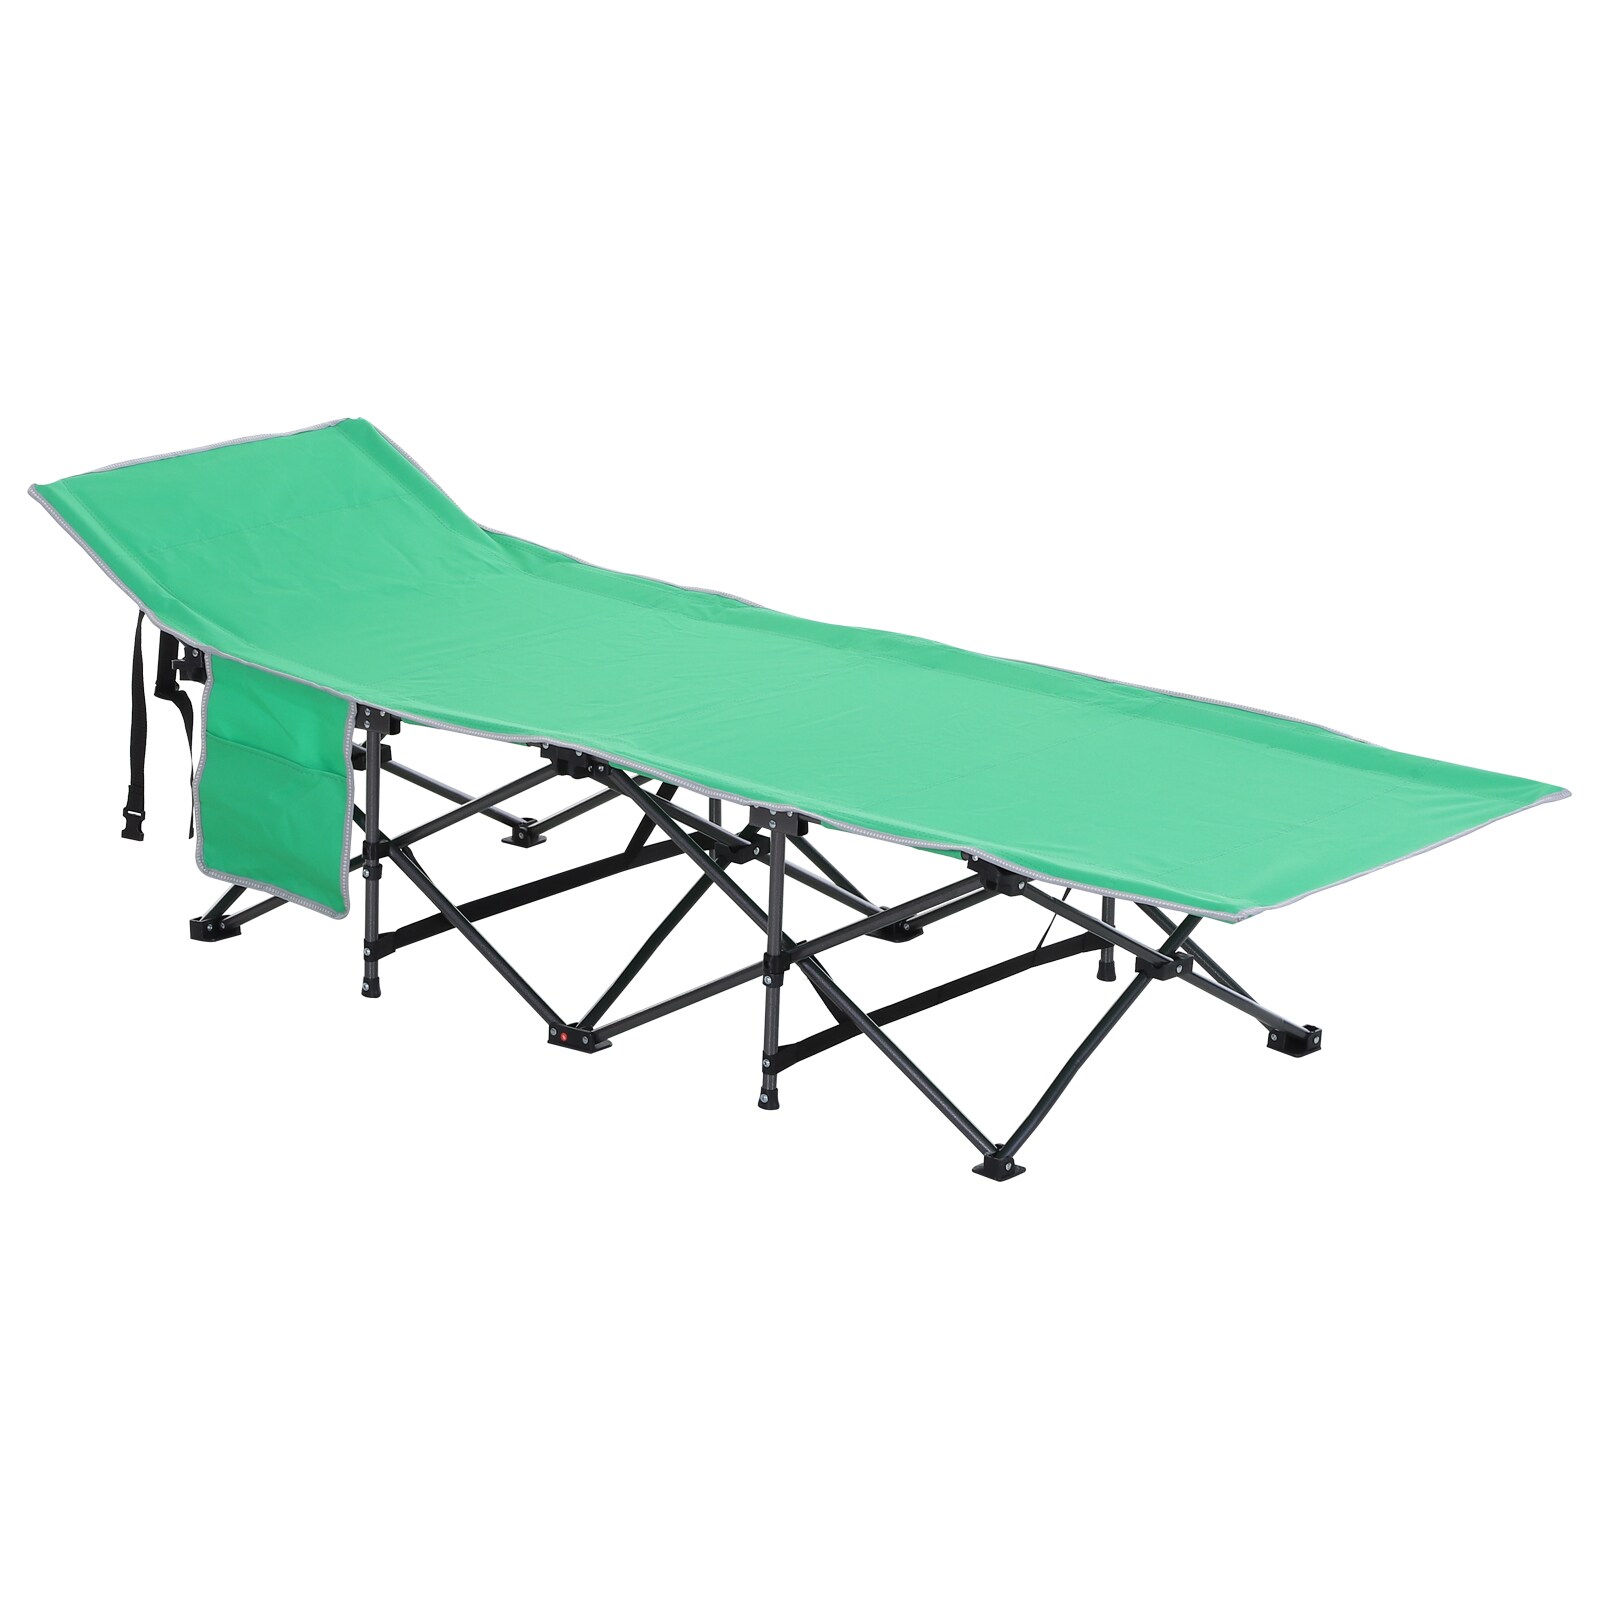 Military Style Aluminium Black Camp Bed Lightweight and Strong side pocket